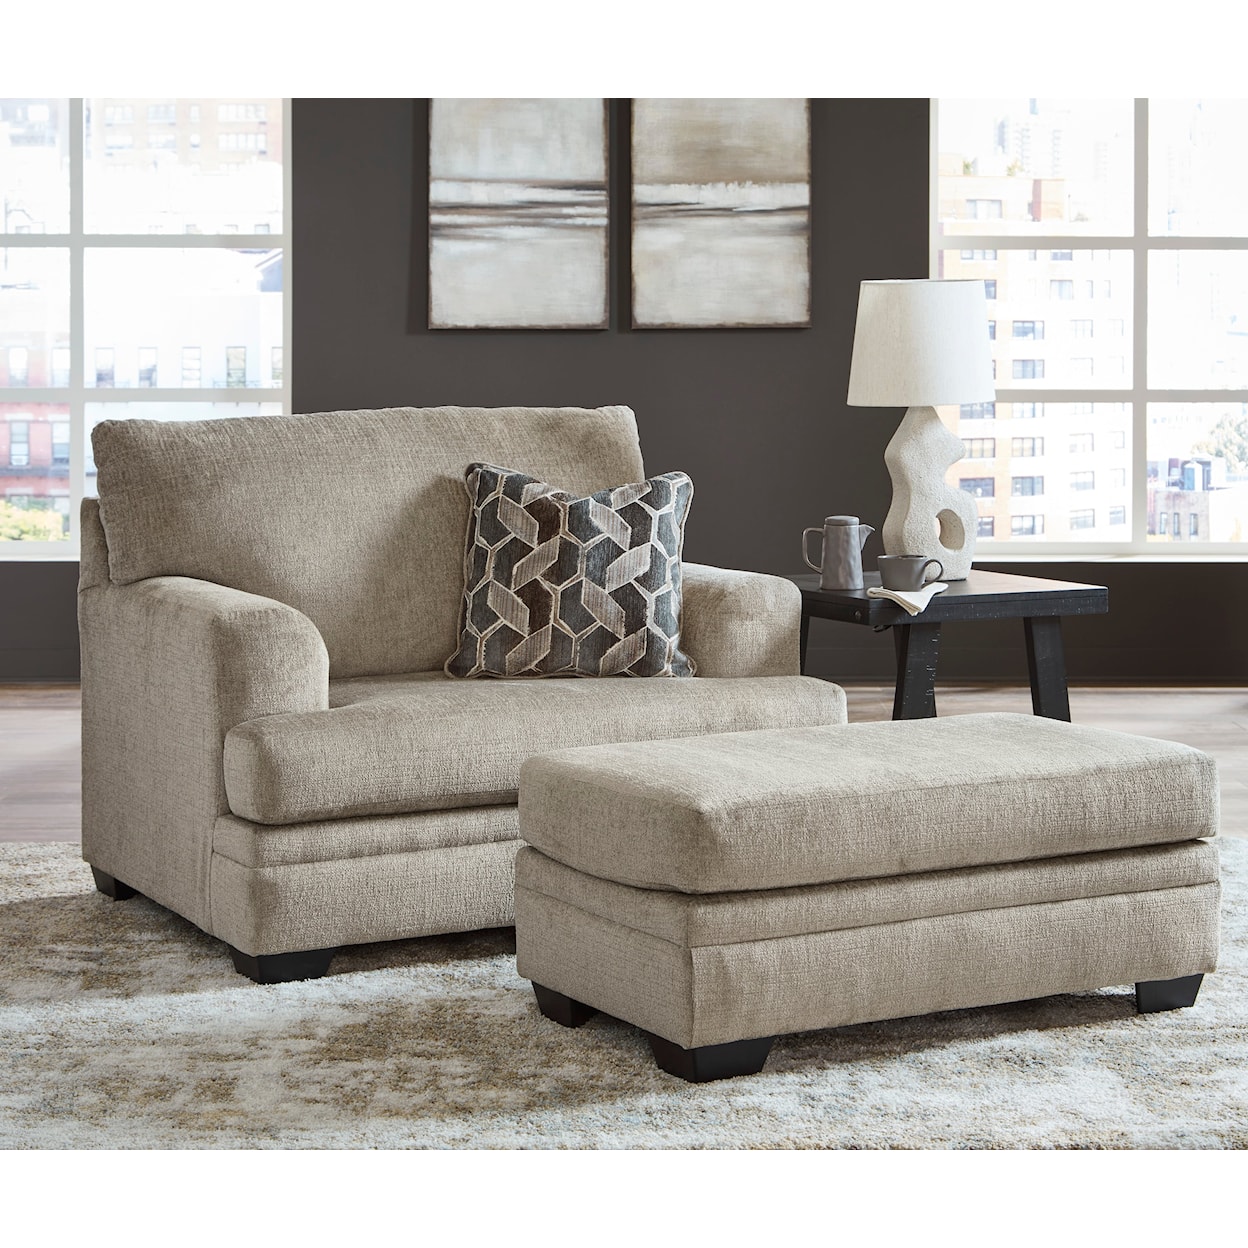 Michael Alan Select Stonemeade Oversized Chair and Ottoman